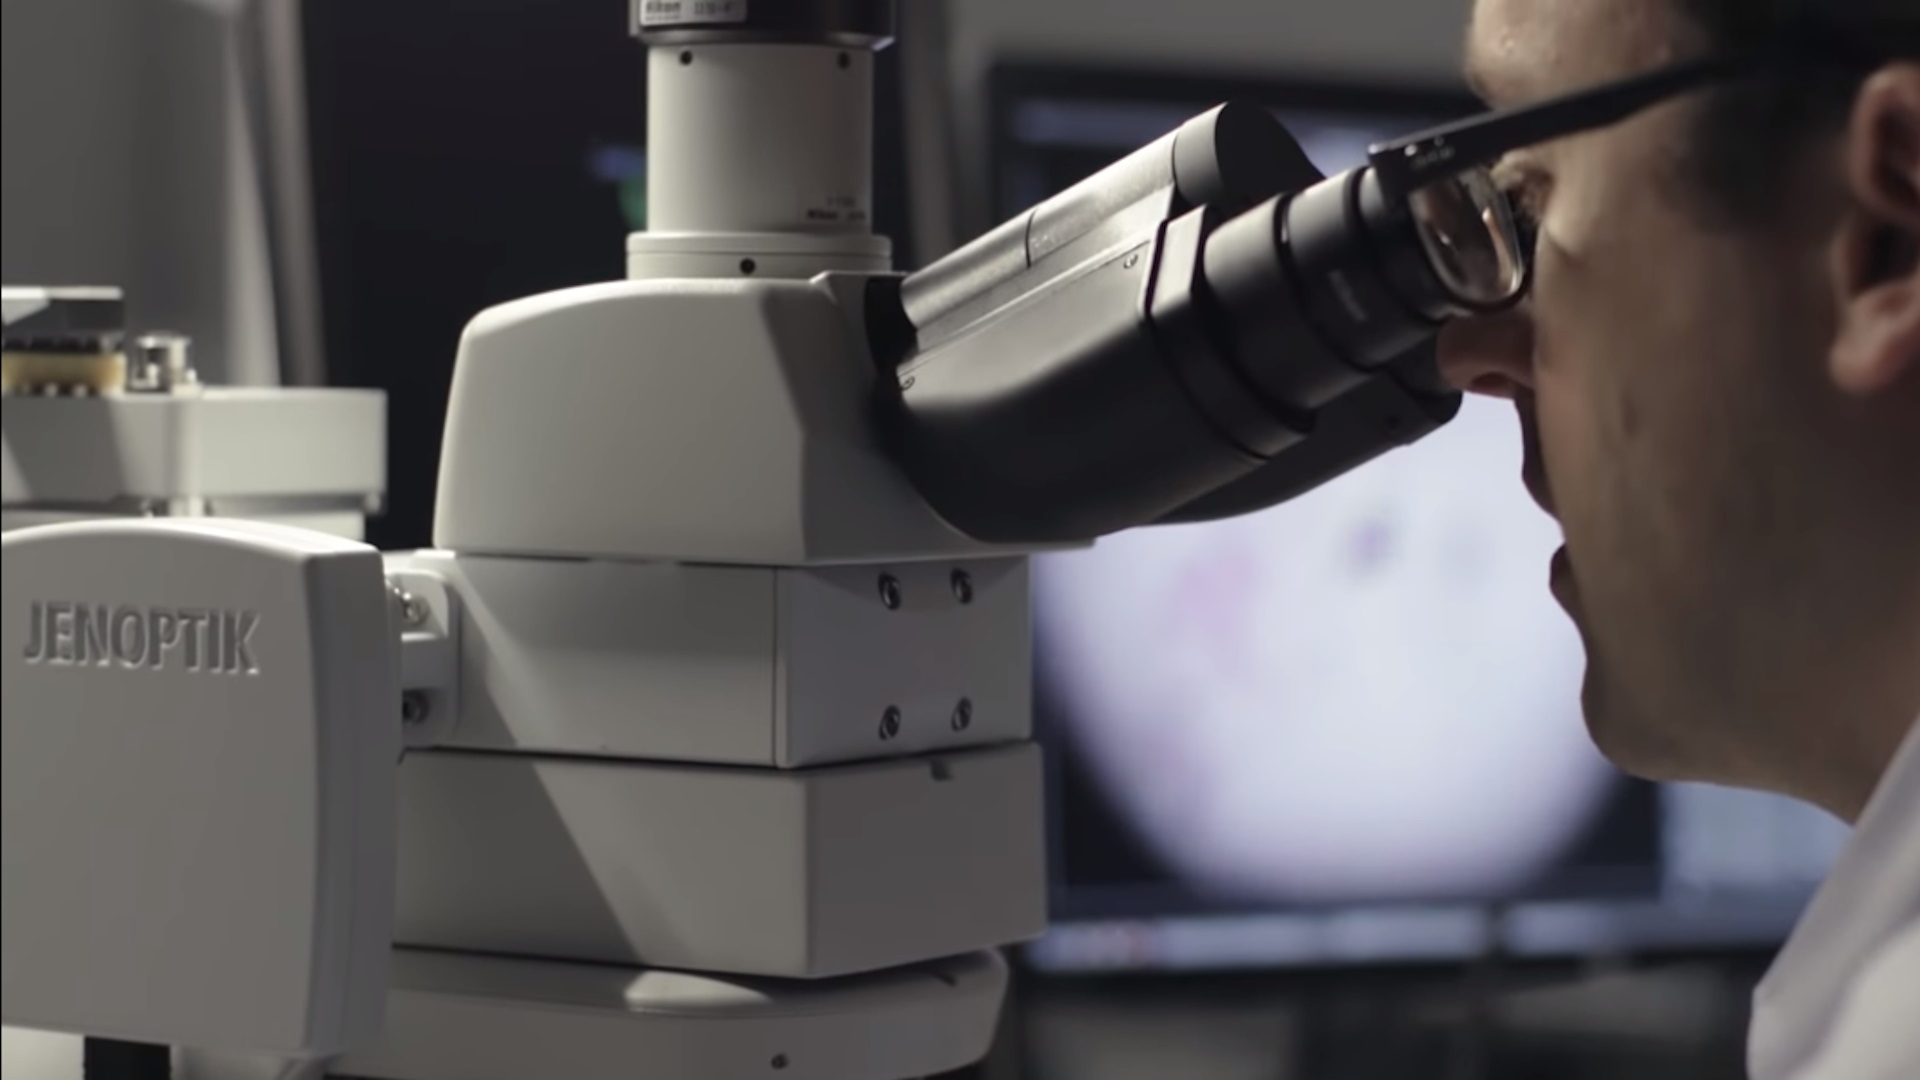 The Google AI microscope uses artificial intelligence to help doctors detect cancer